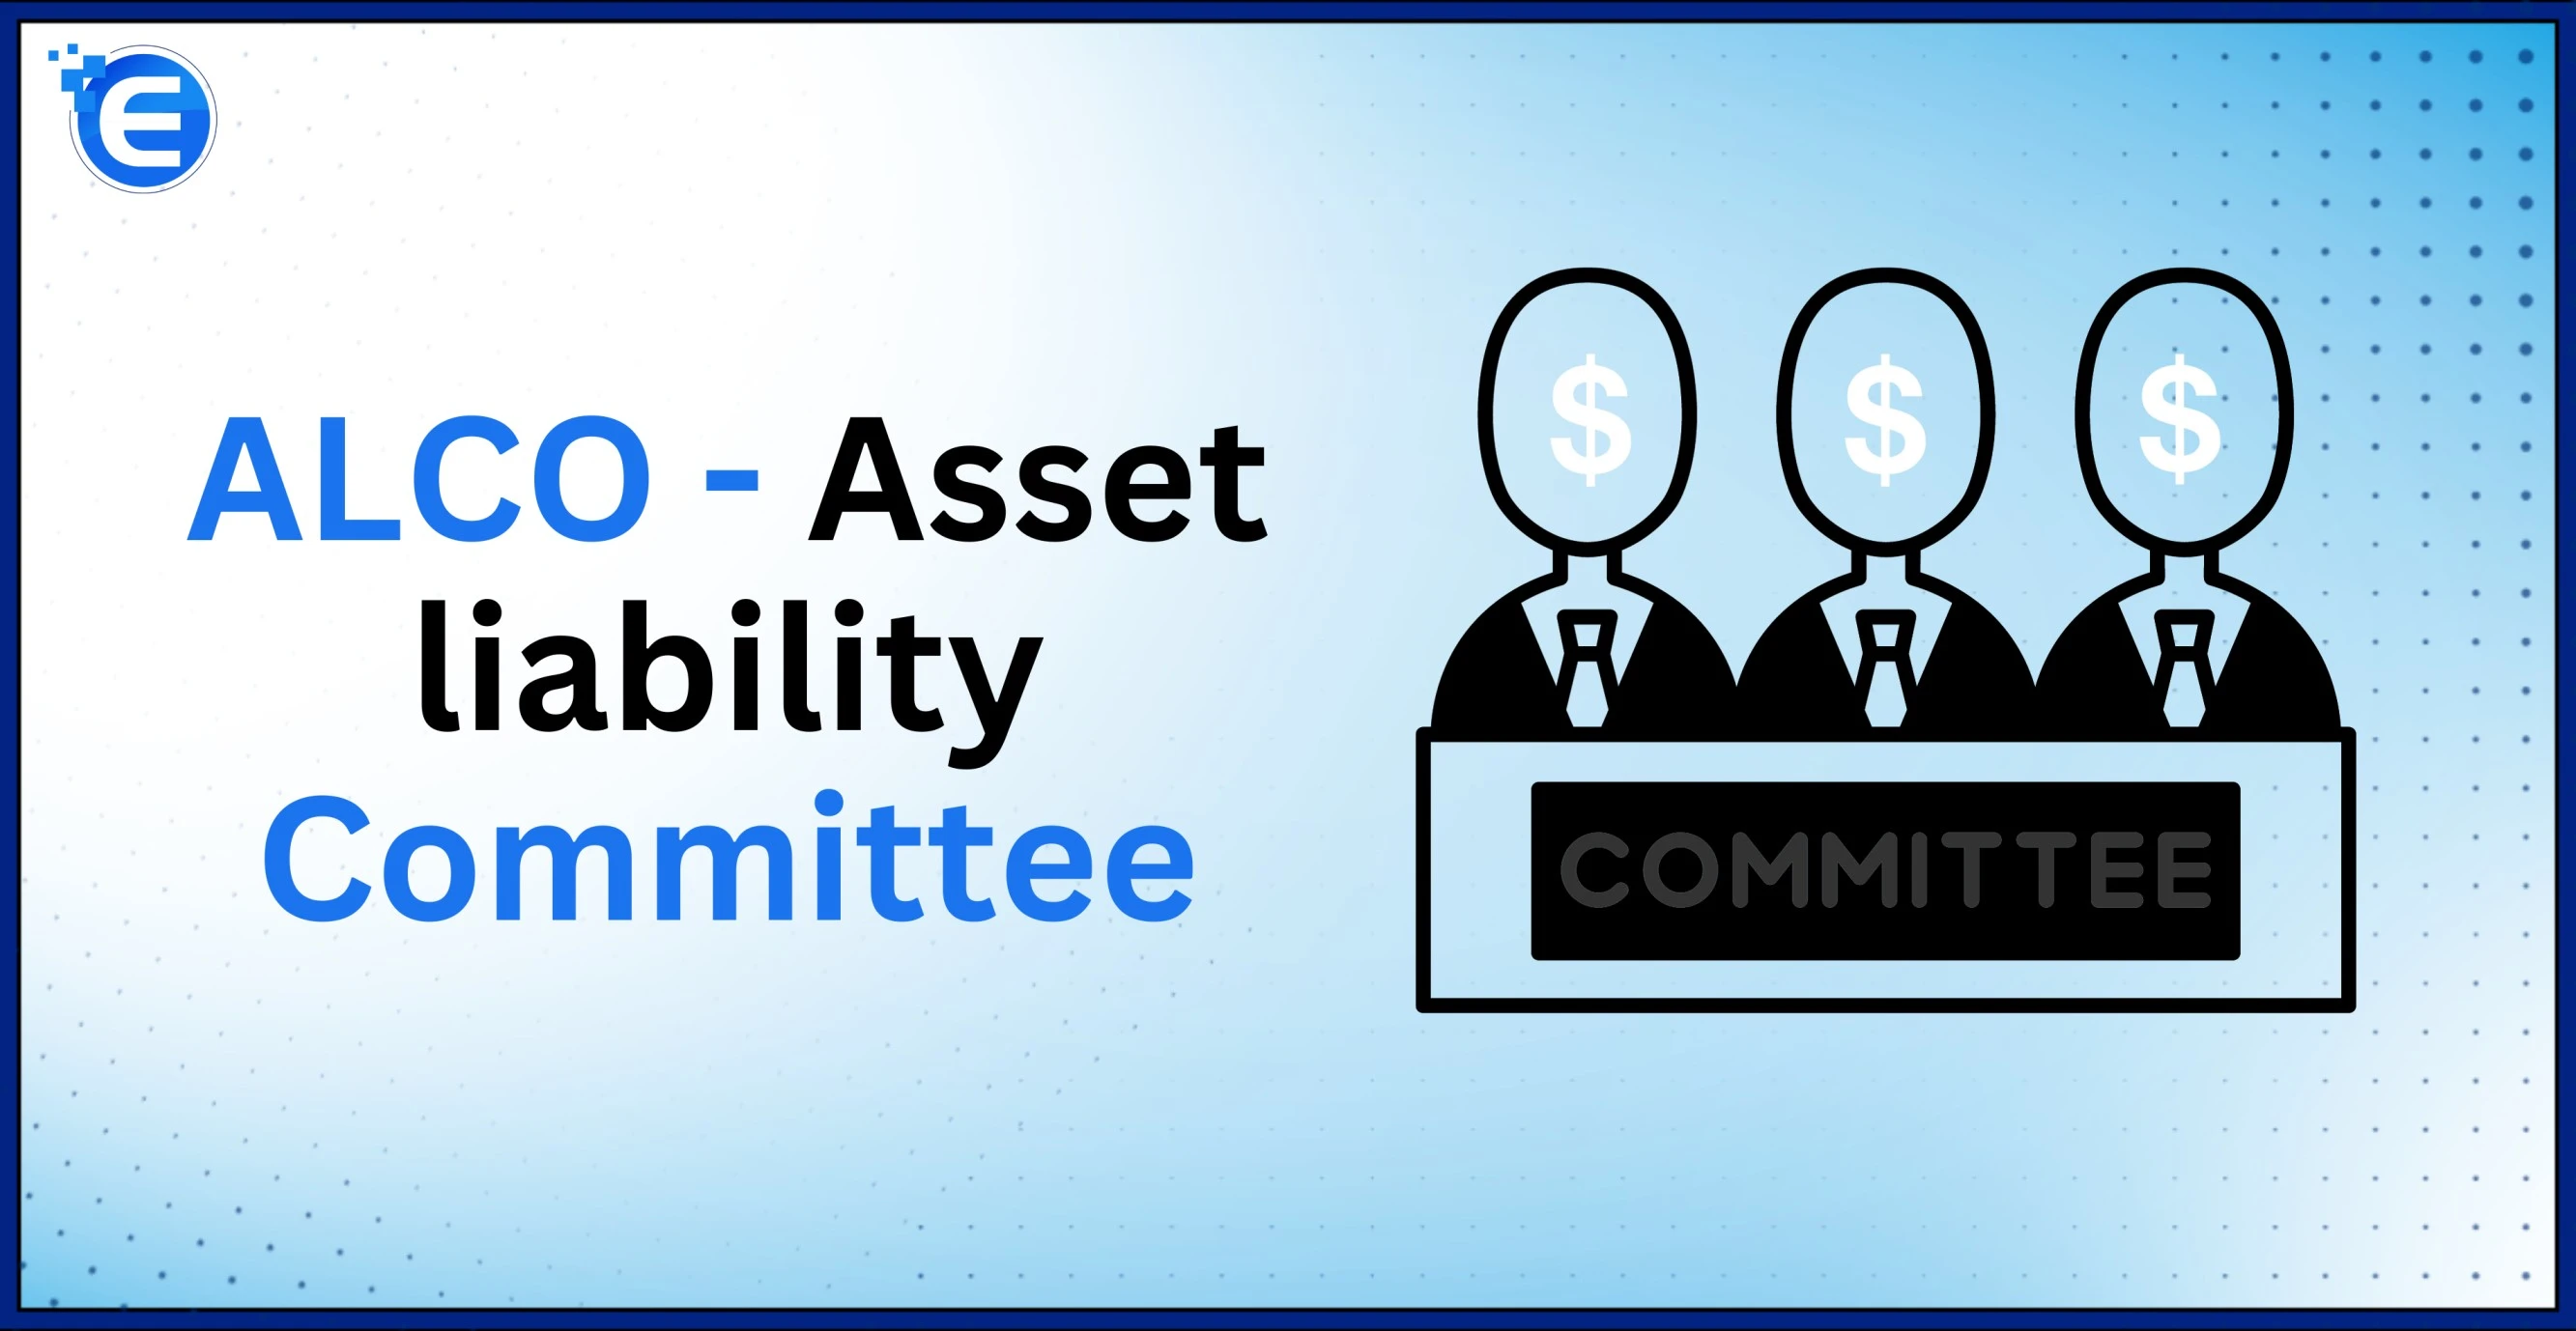 ALCO (Asset-liability Committee)